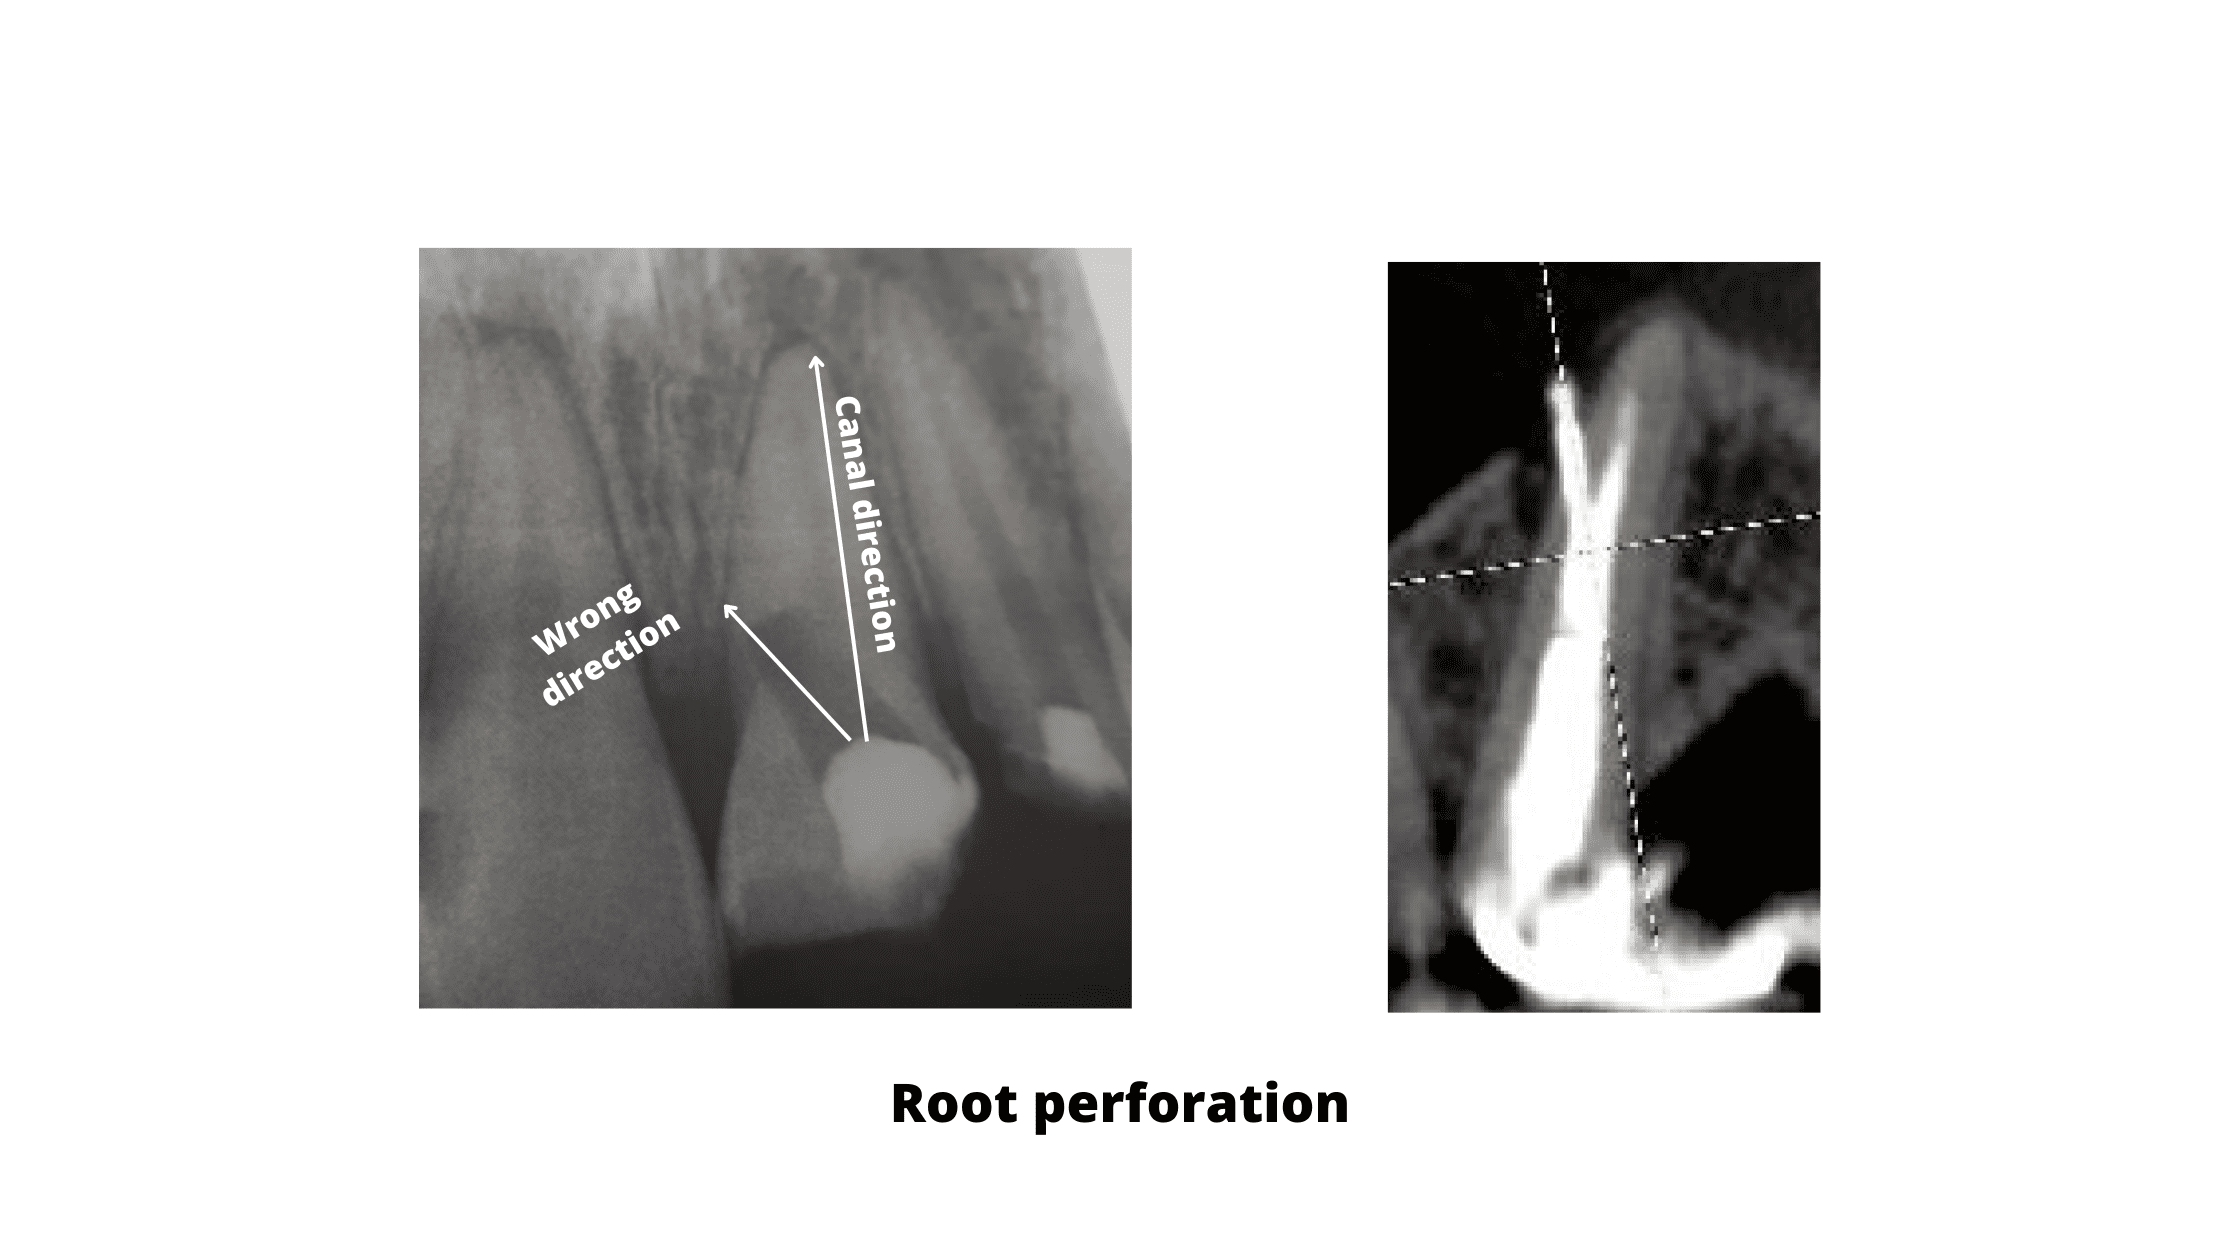 Root perforation (x-ray image)